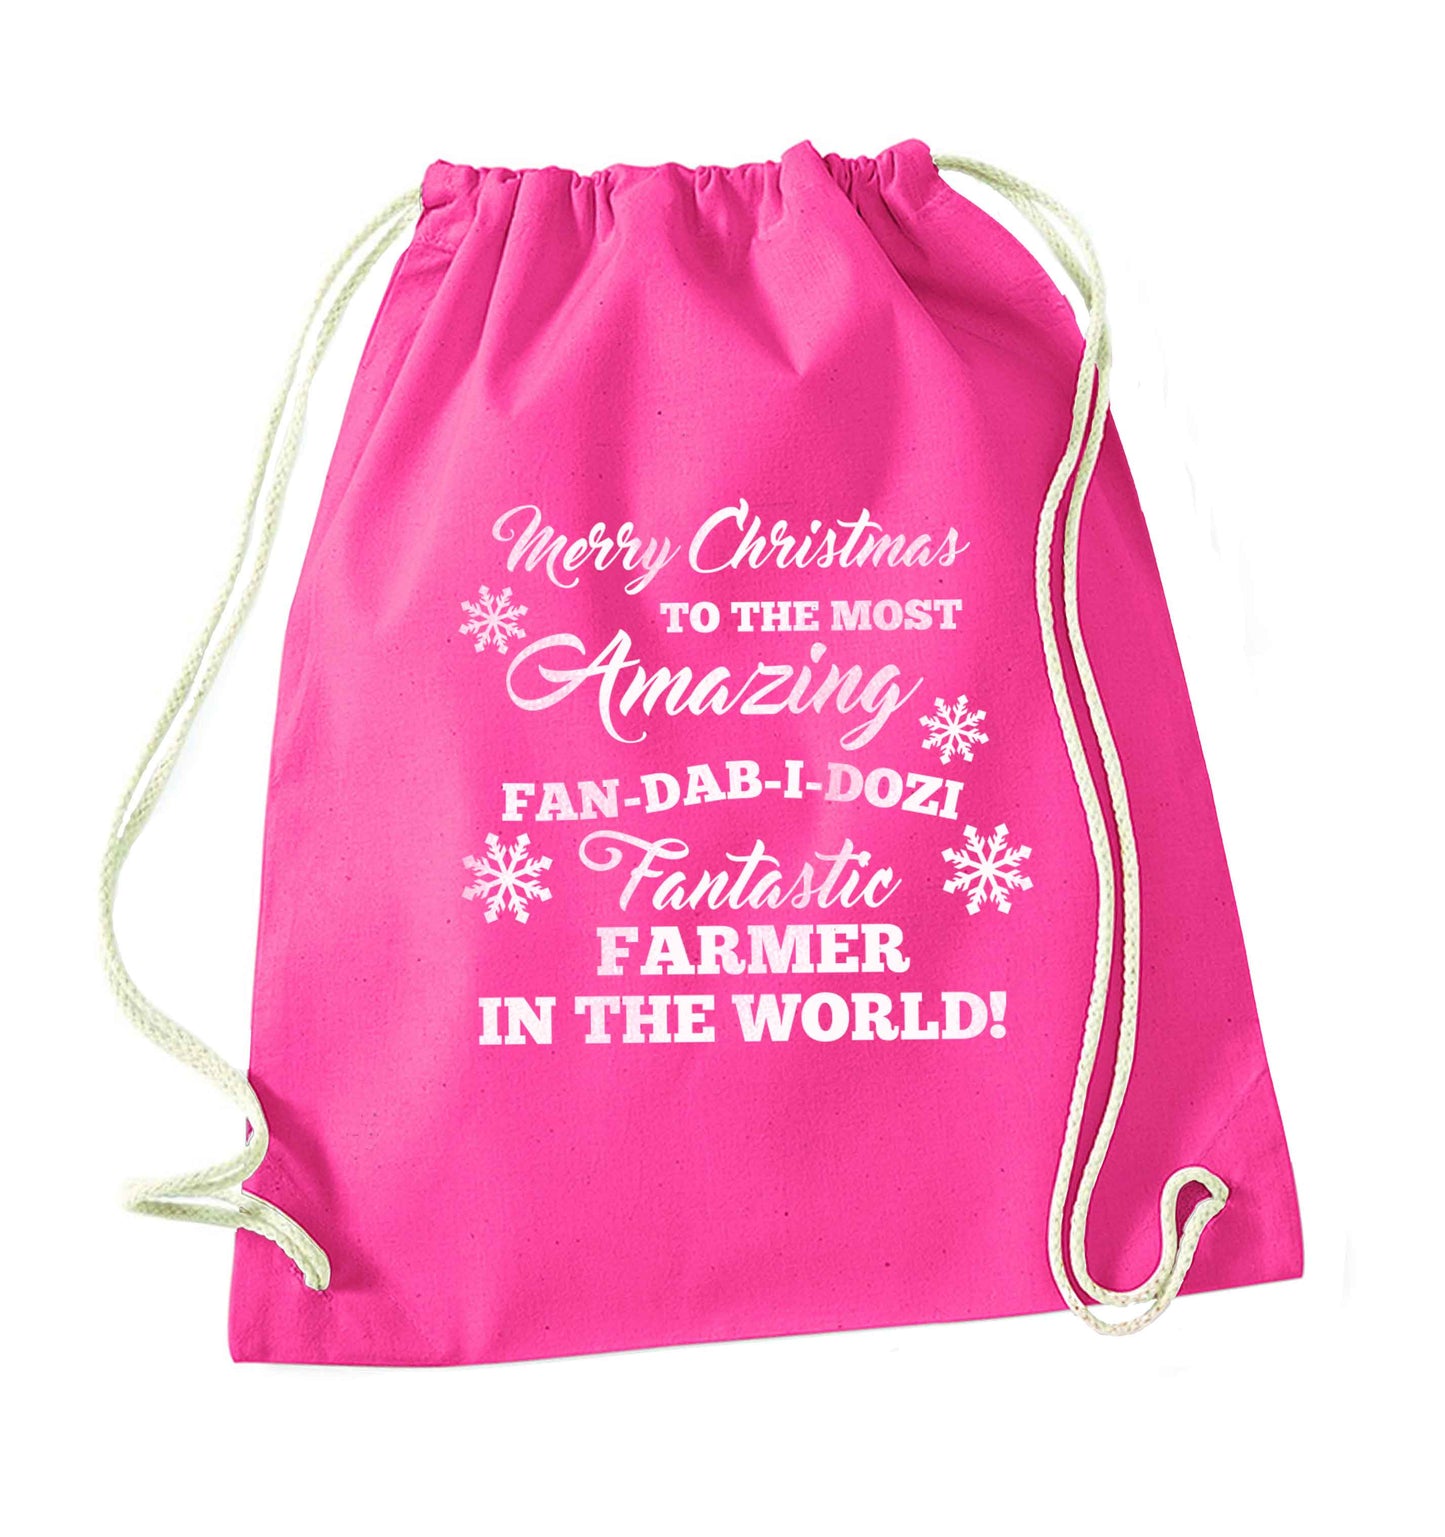 Merry Christmas to the most amazing farmer in the world! pink drawstring bag